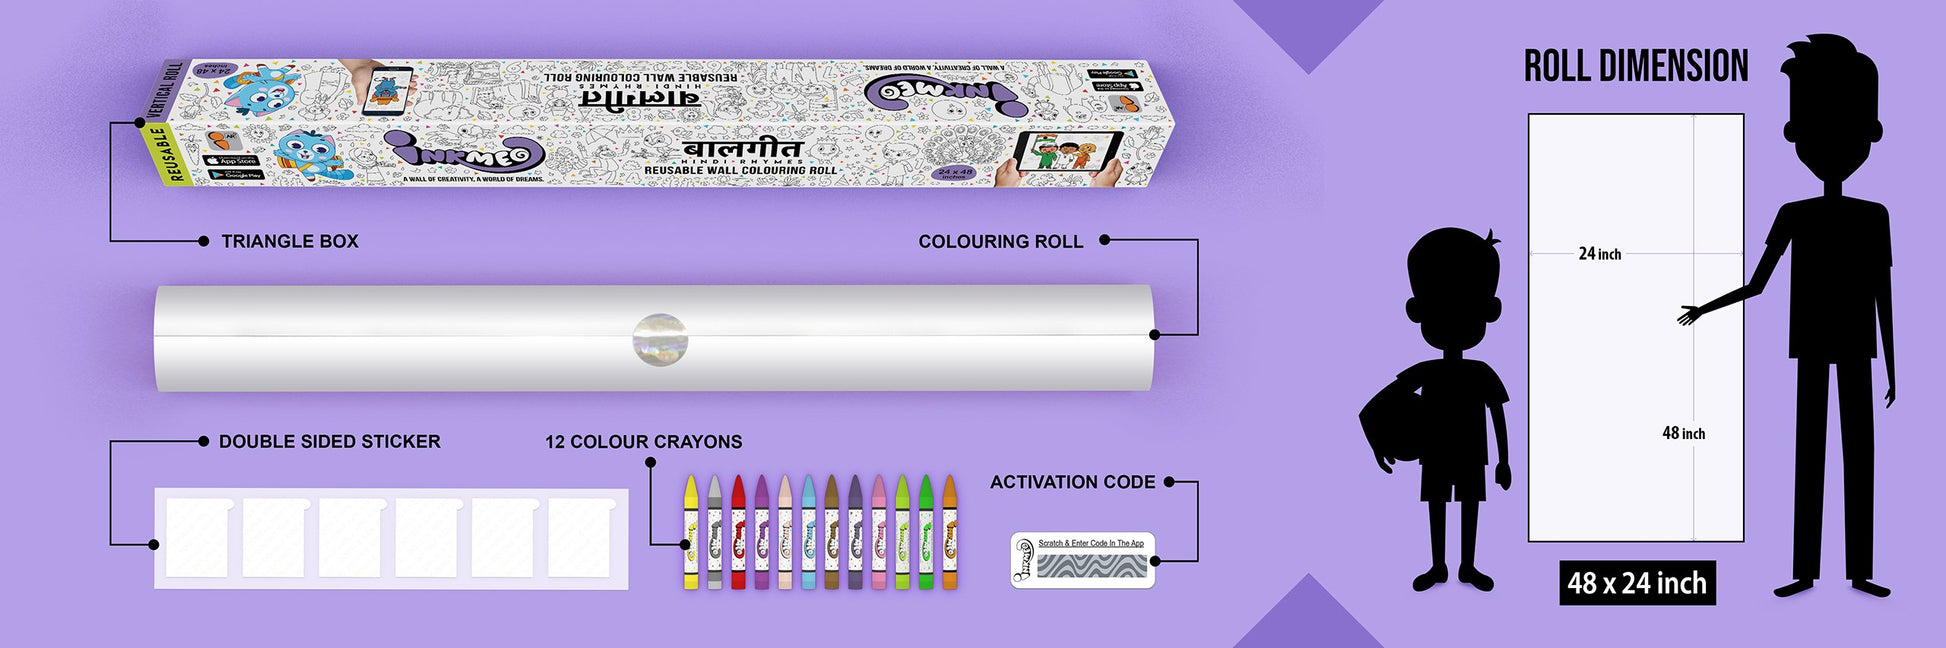 The image illustrates a lavender background with Triangle box, colouring roll, 6 double tape, 12 colour crayons and activation code. and next to that the roll dimention is mentioned as 24*48 inches in size with child ad adult height reference